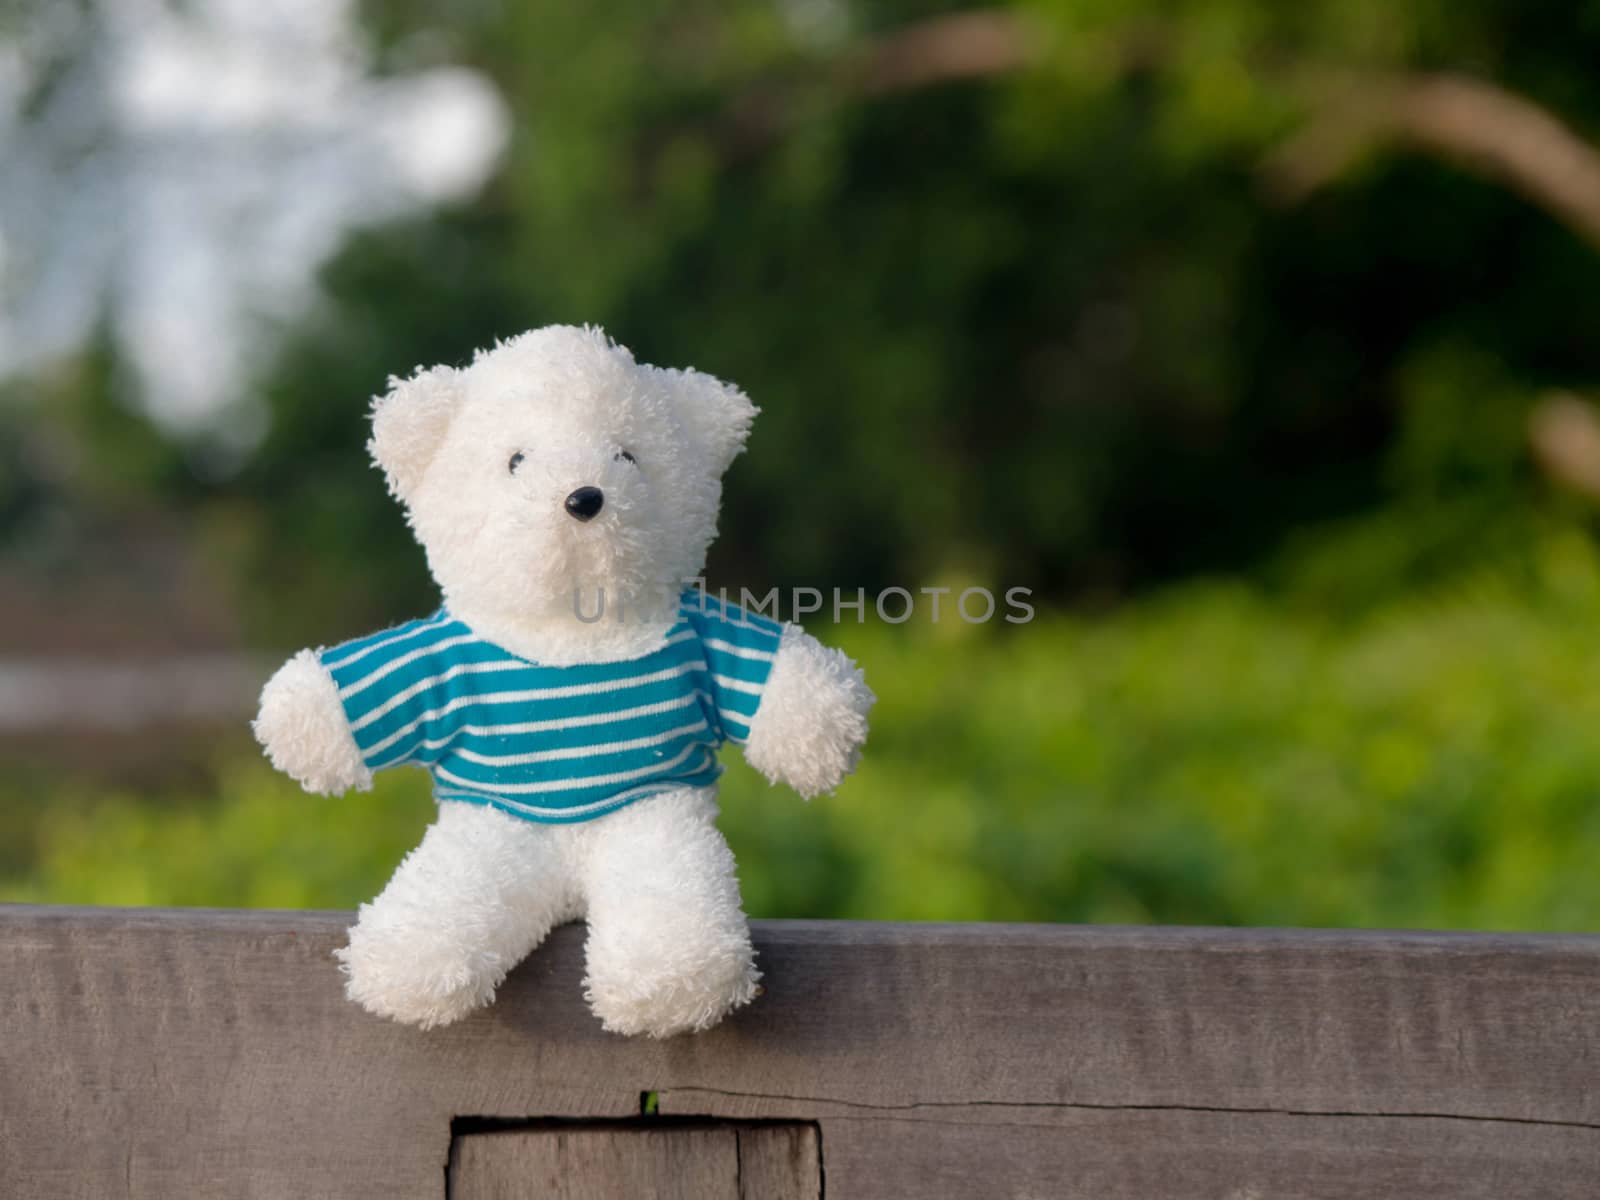 A white teddy bear wearing a blue shirt on the wood behind is a green tree and river.